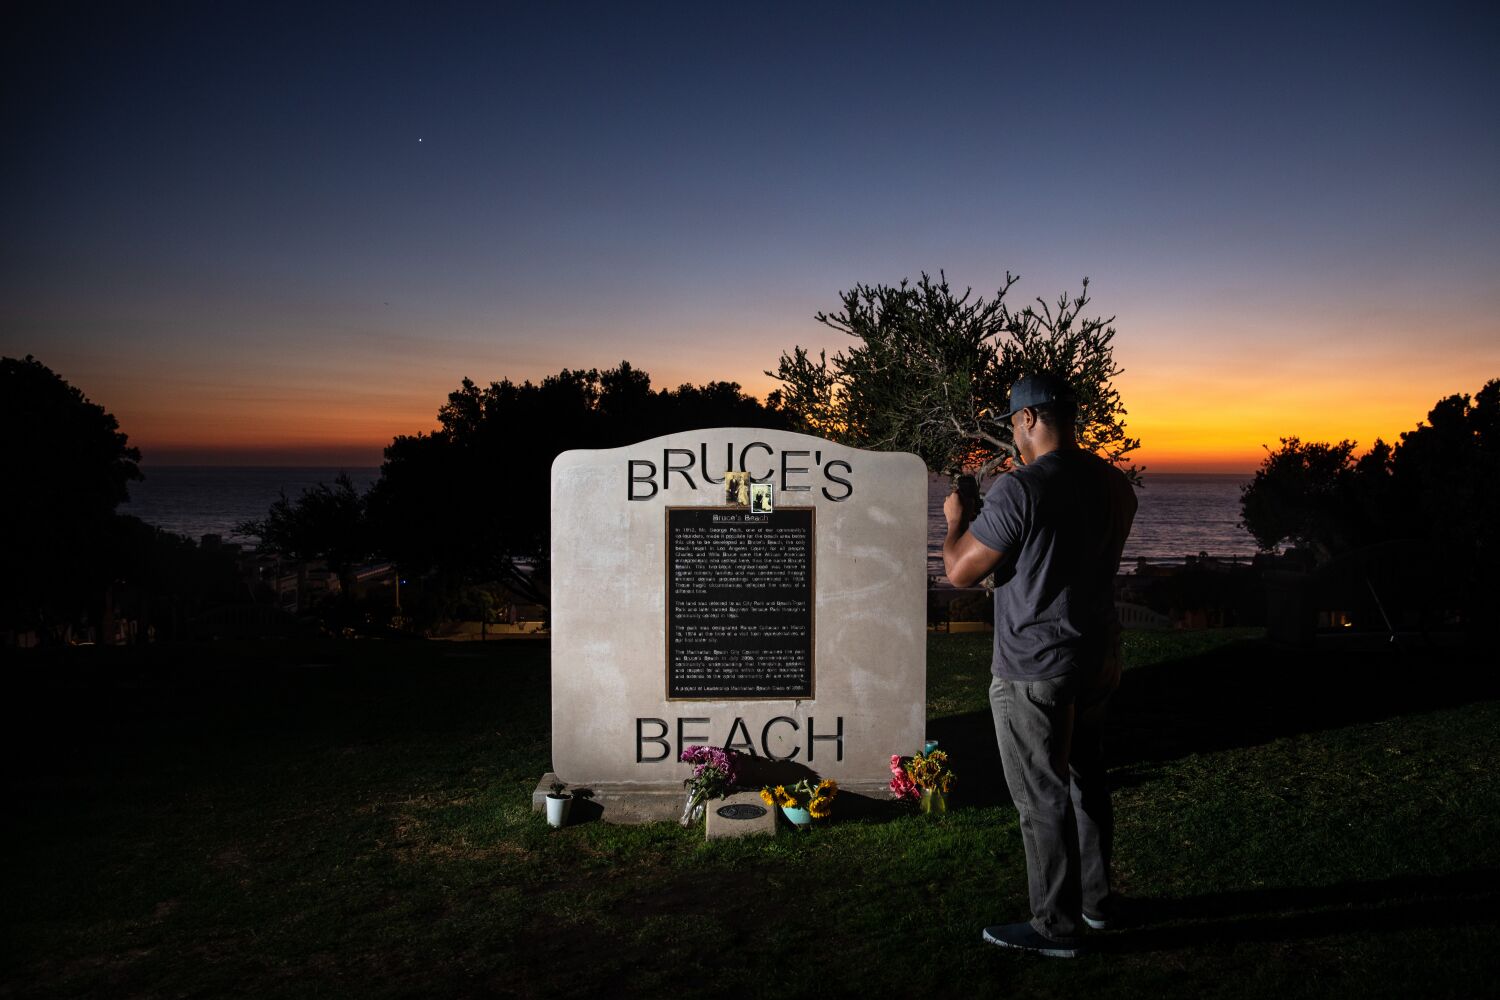 Opinion: An apology is nice but the Black families and communities of Bruce's Beach deserve more